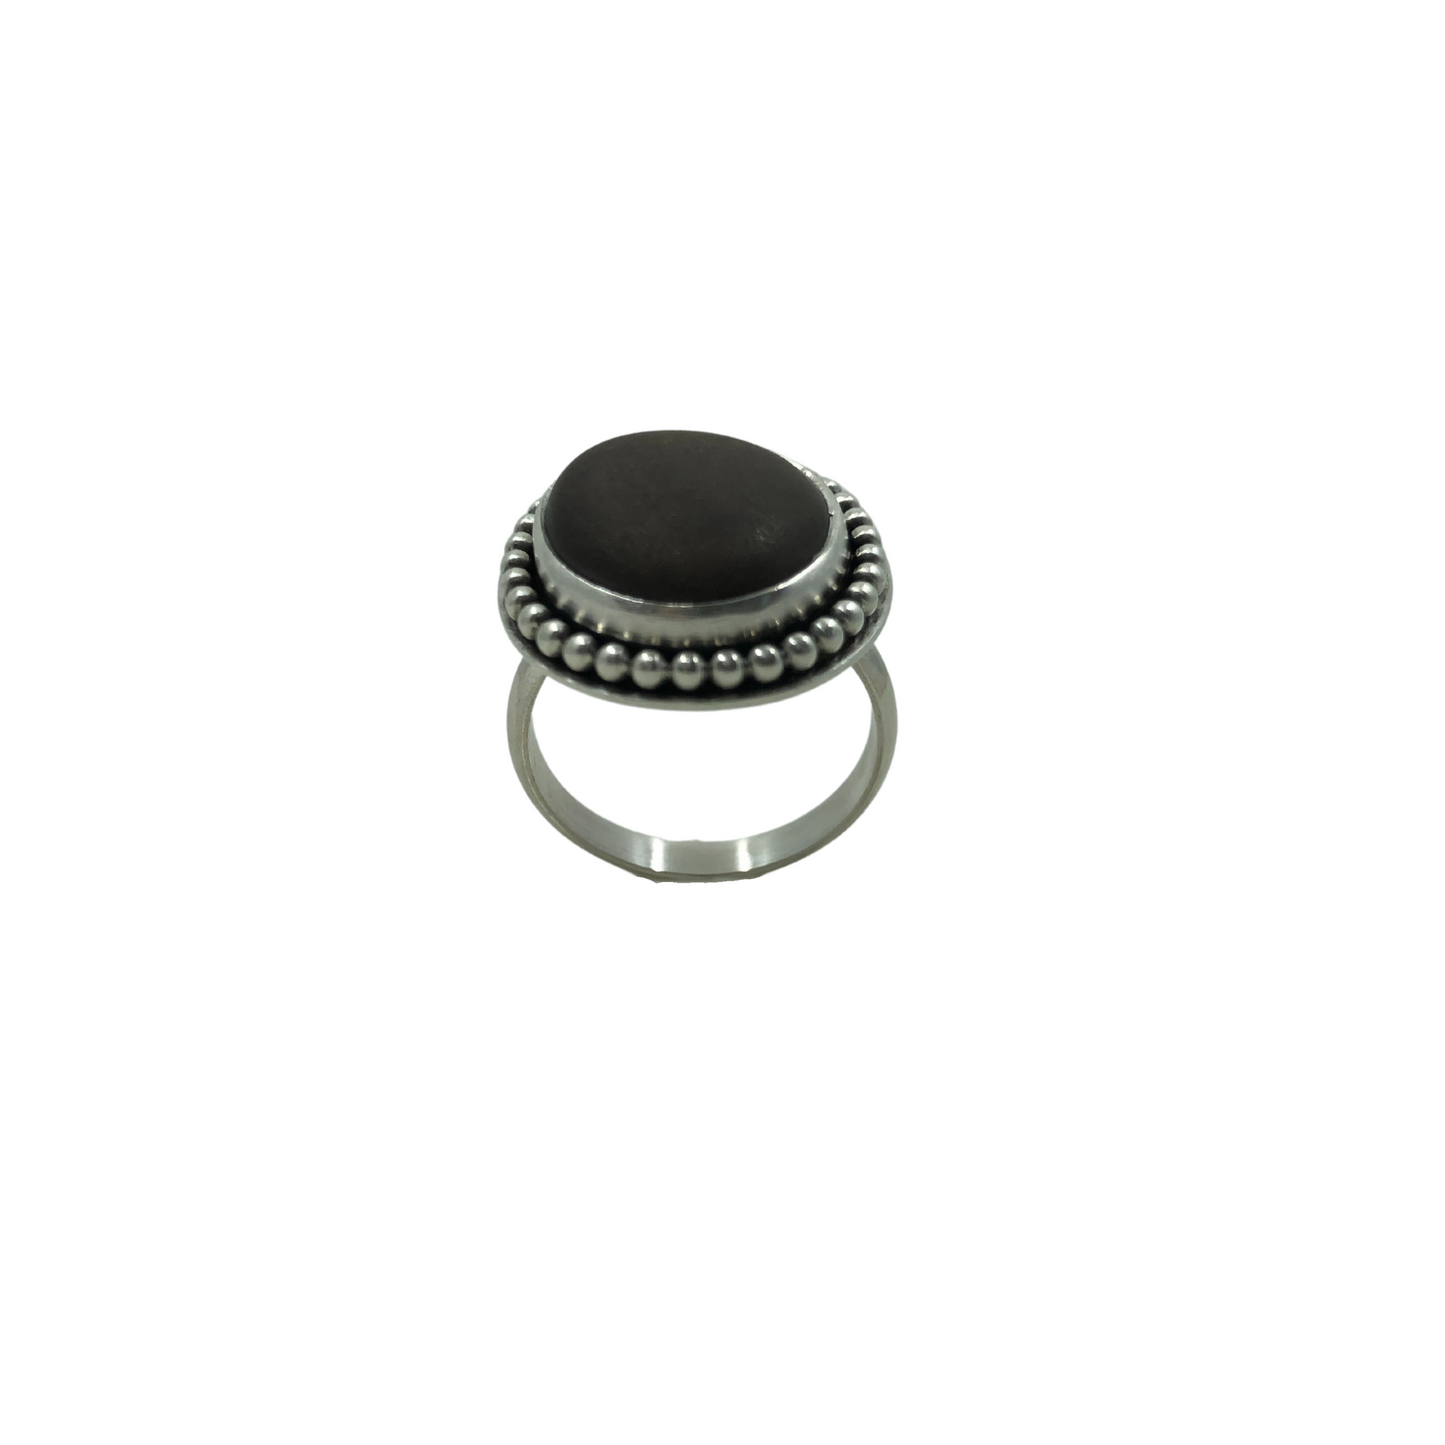 Large Sterling Silver Ring with Brown Beach Stone & Bead Detailing